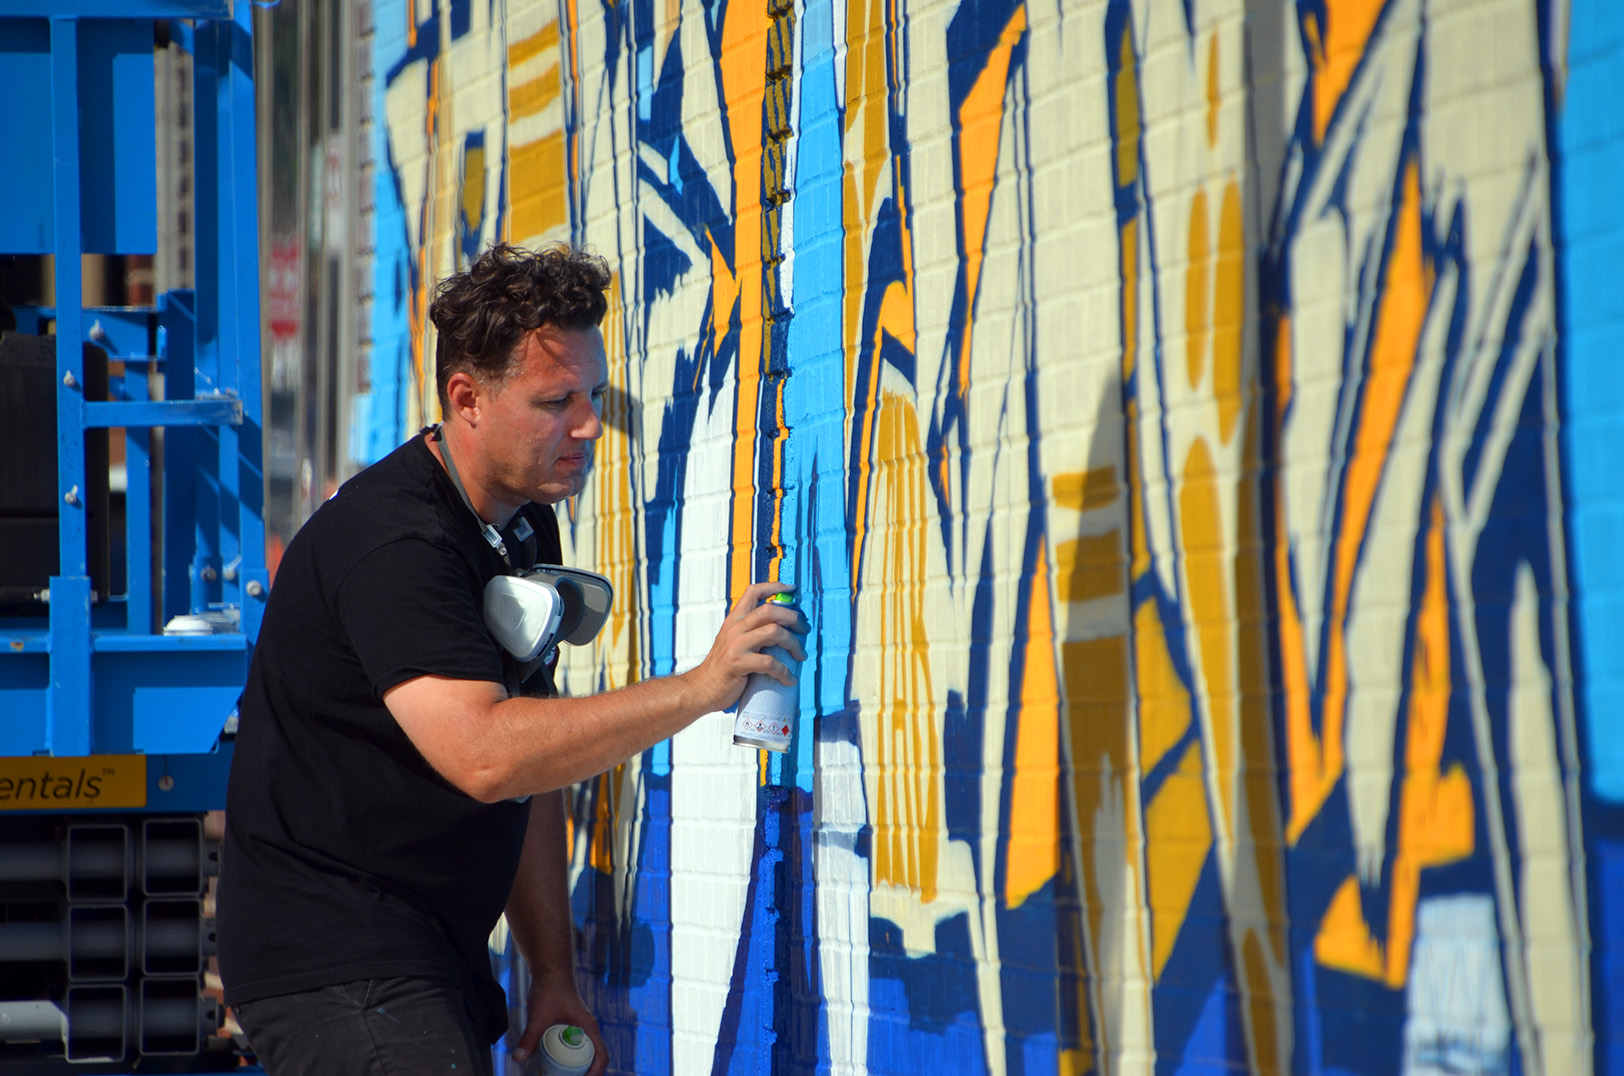 SpraySeeMo returns to Crossroads, painting a shared space for graffiti artists, businesses (Photos)